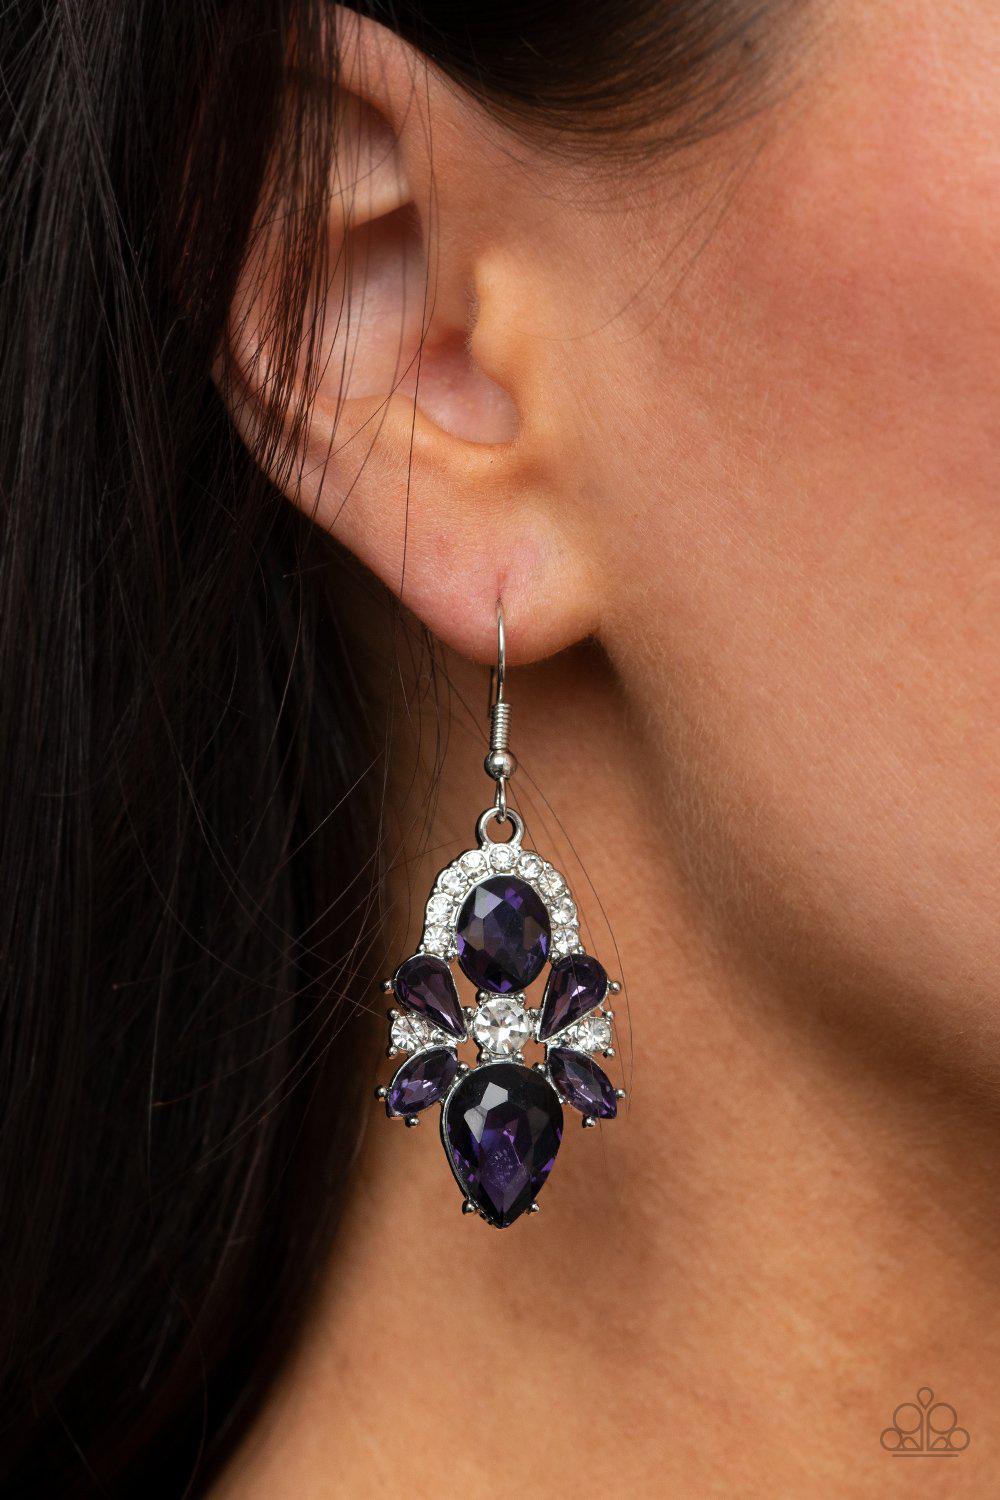 Stunning Starlet Purple and White Rhinestone Earrings - Paparazzi Accessories- lightbox - CarasShop.com - $5 Jewelry by Cara Jewels